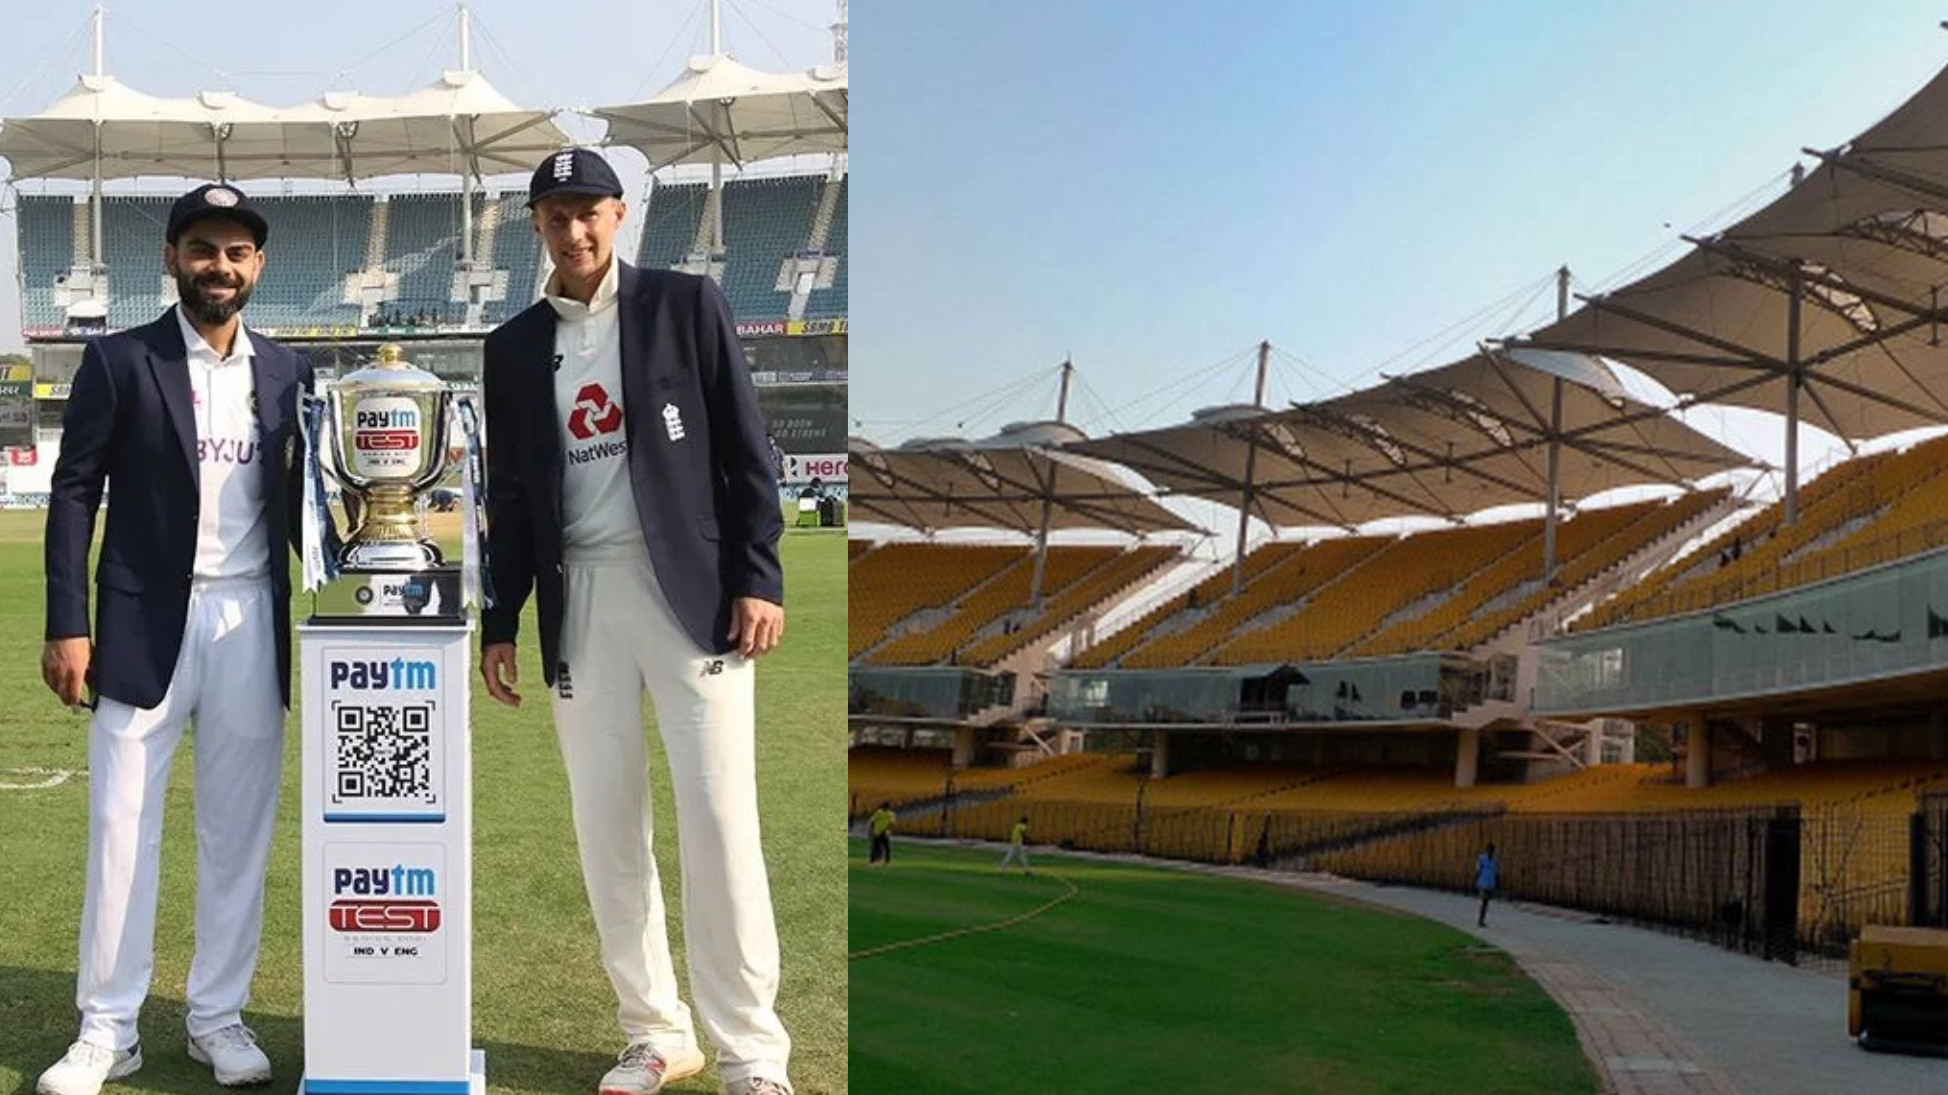 IND v ENG 2021: Chepauk to allow crowd in its 3 'disputed' stands for 2nd Test which have been closed since 2012